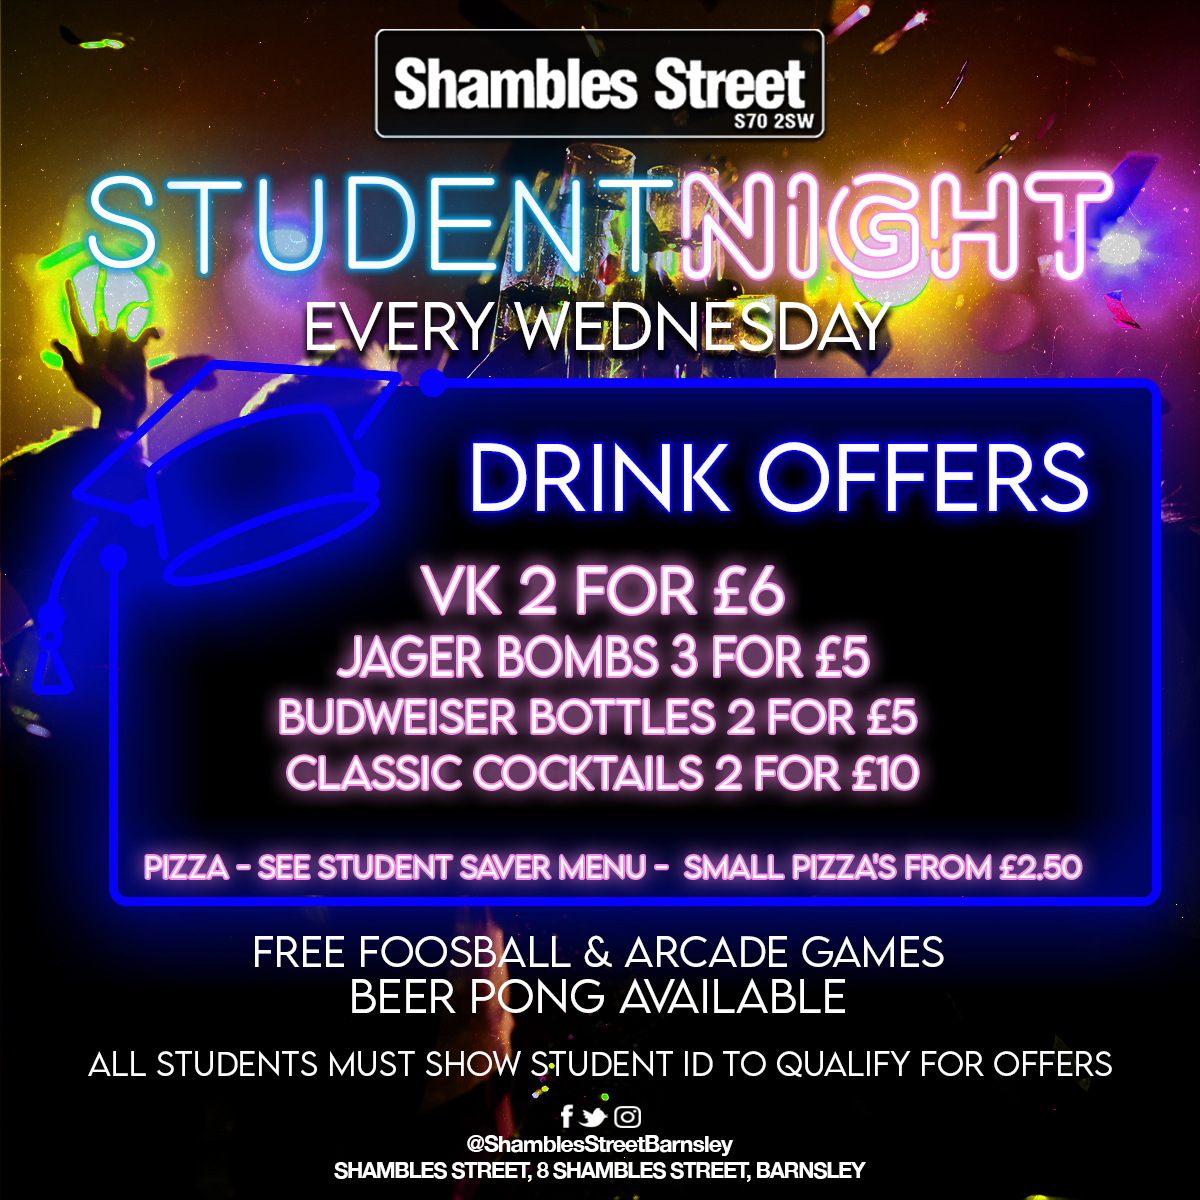 Join us every Wednesday for Student Night🤩 Drinks offers & Pizza - see Student Saver menu! F